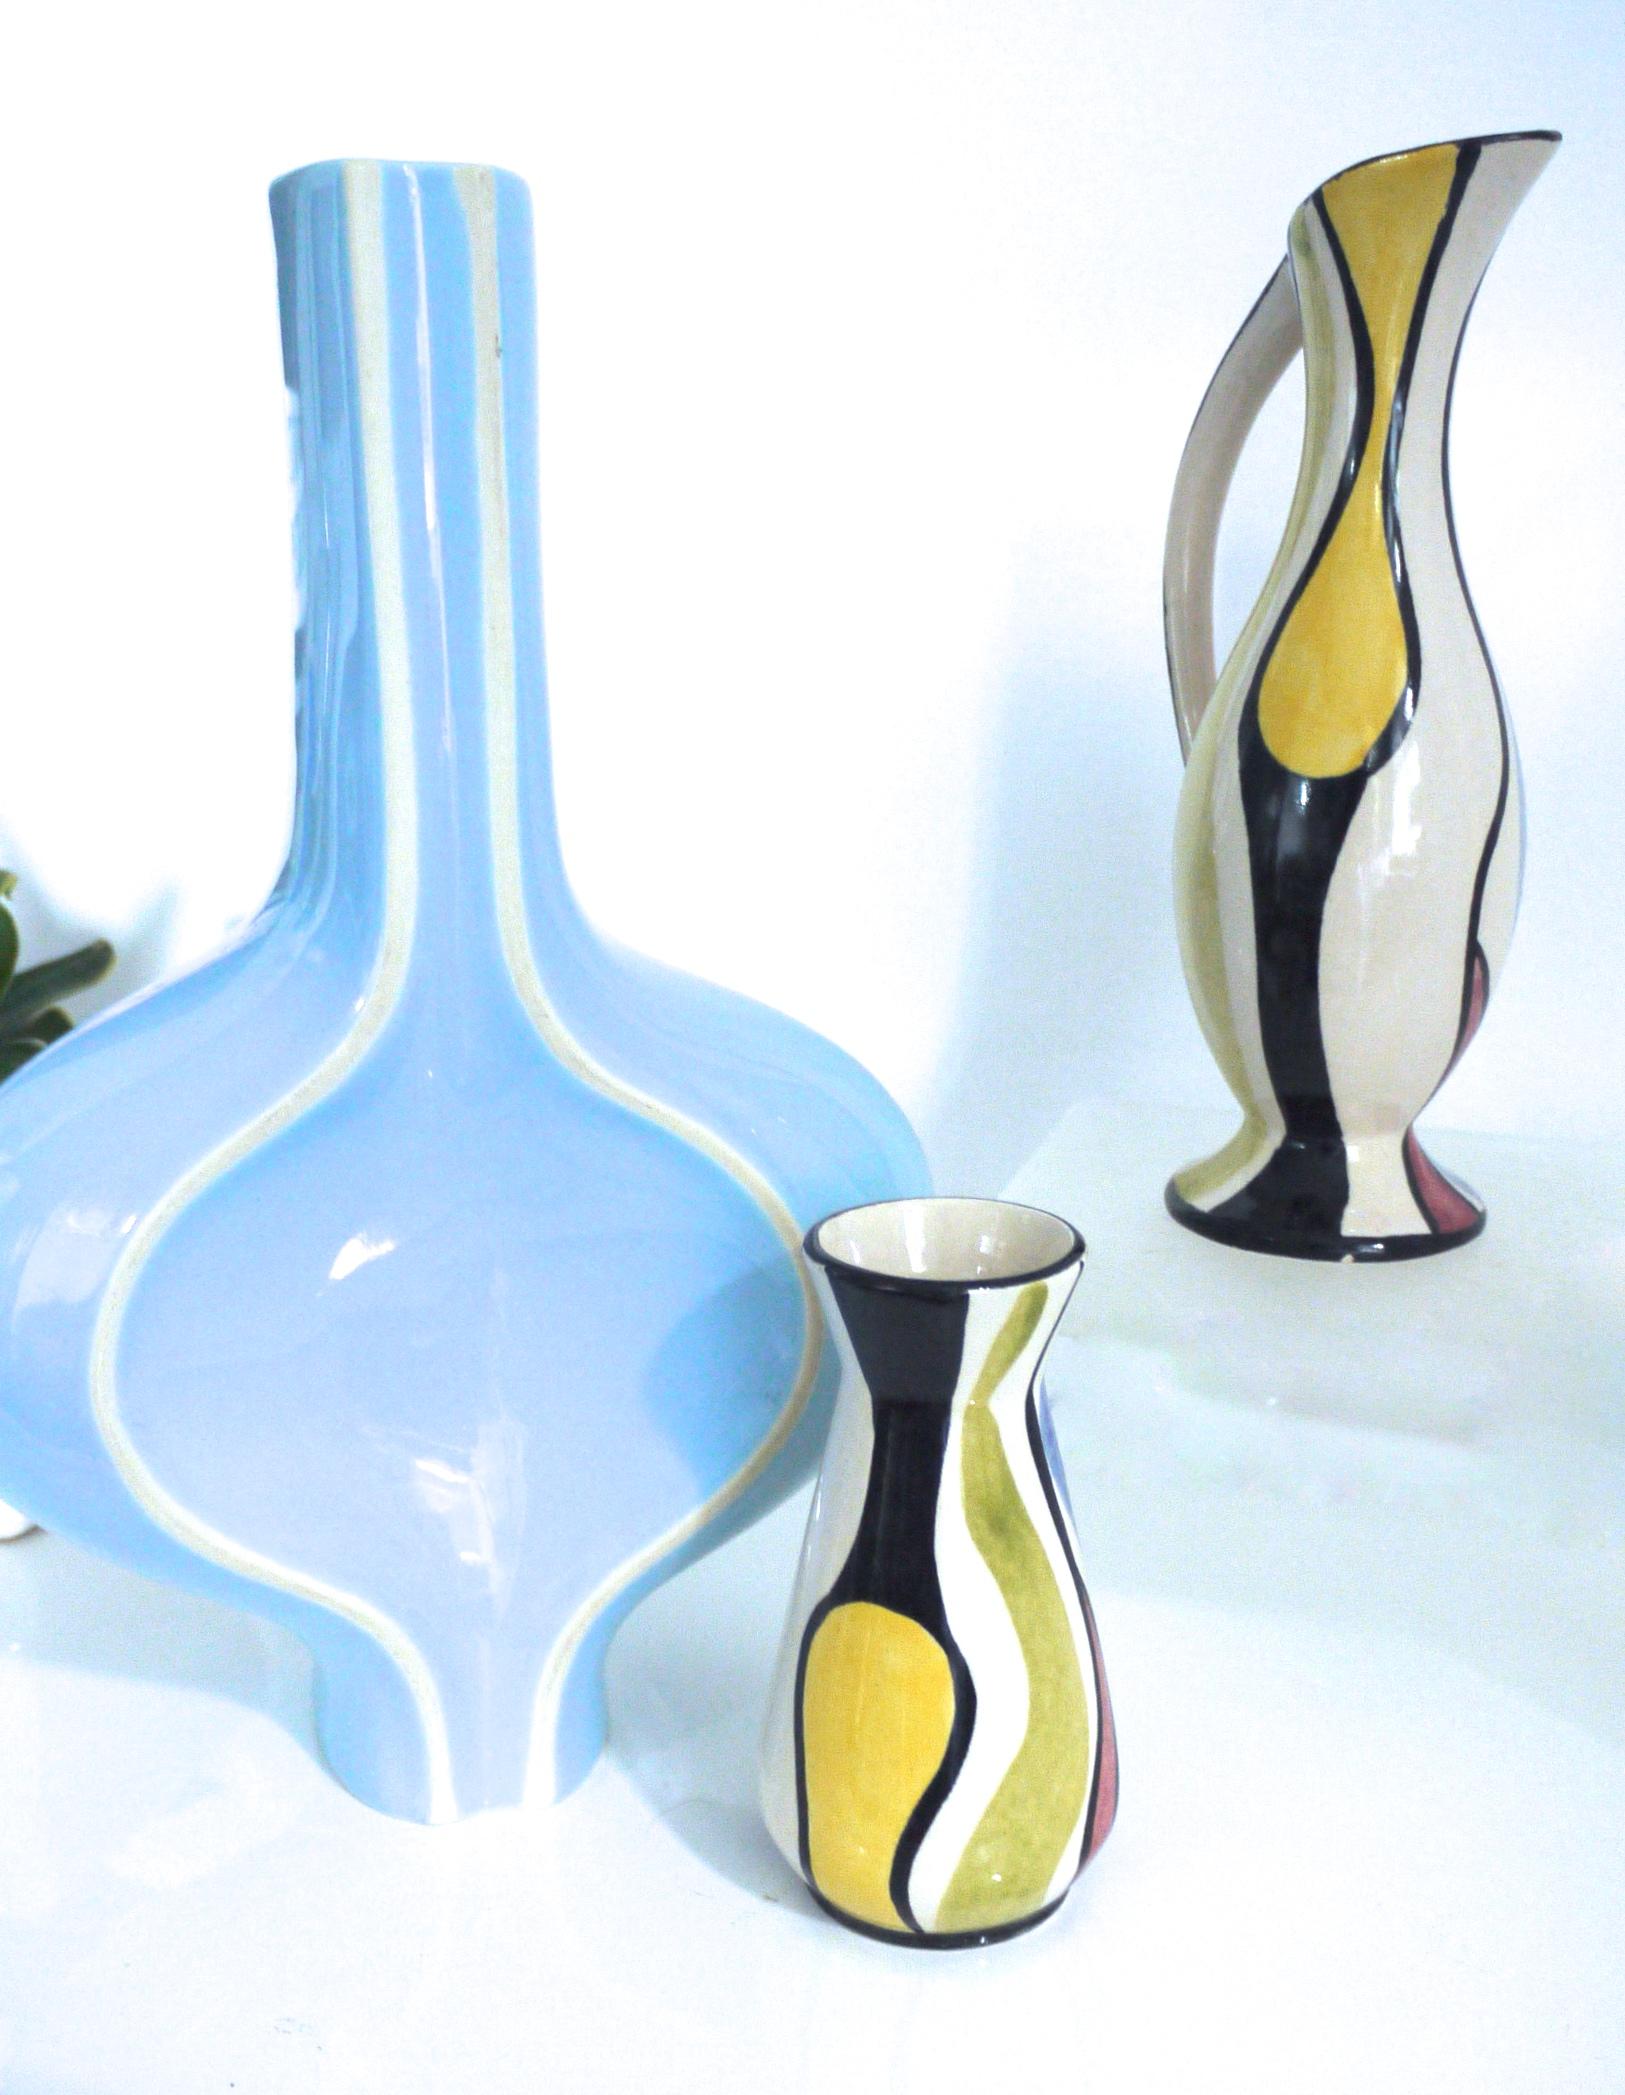 Italian Sought after, Space Age China Swallow Vase by Scabetti Dominic Bromley, 2002 UK For Sale